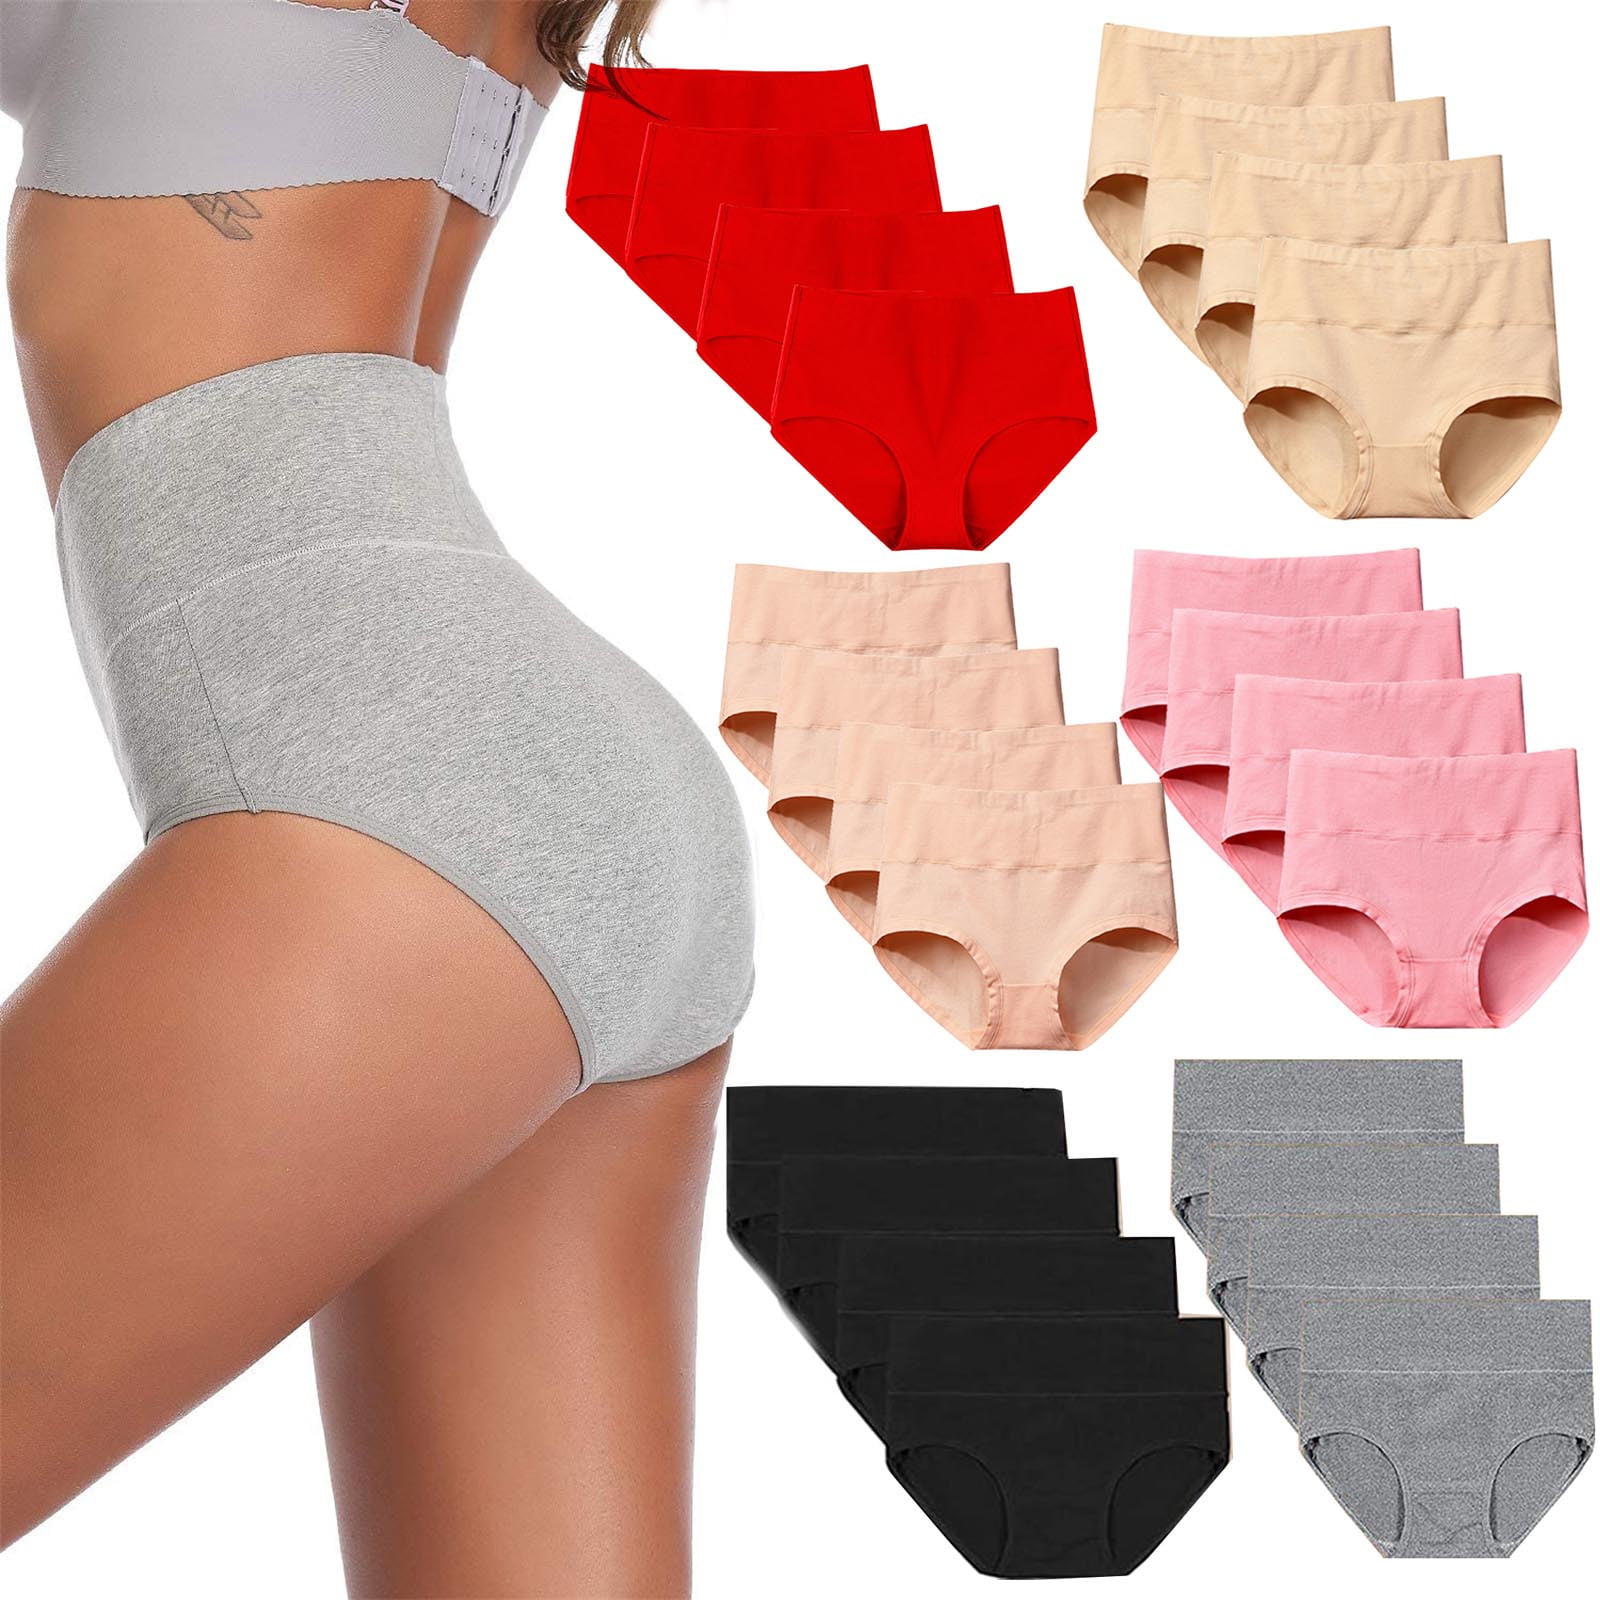 Reshinee Cotton Women's Underwear High Waisted Breathable Full Briefs Soft Ladies  Panties Underpants 4 Pack at  Women's Clothing store